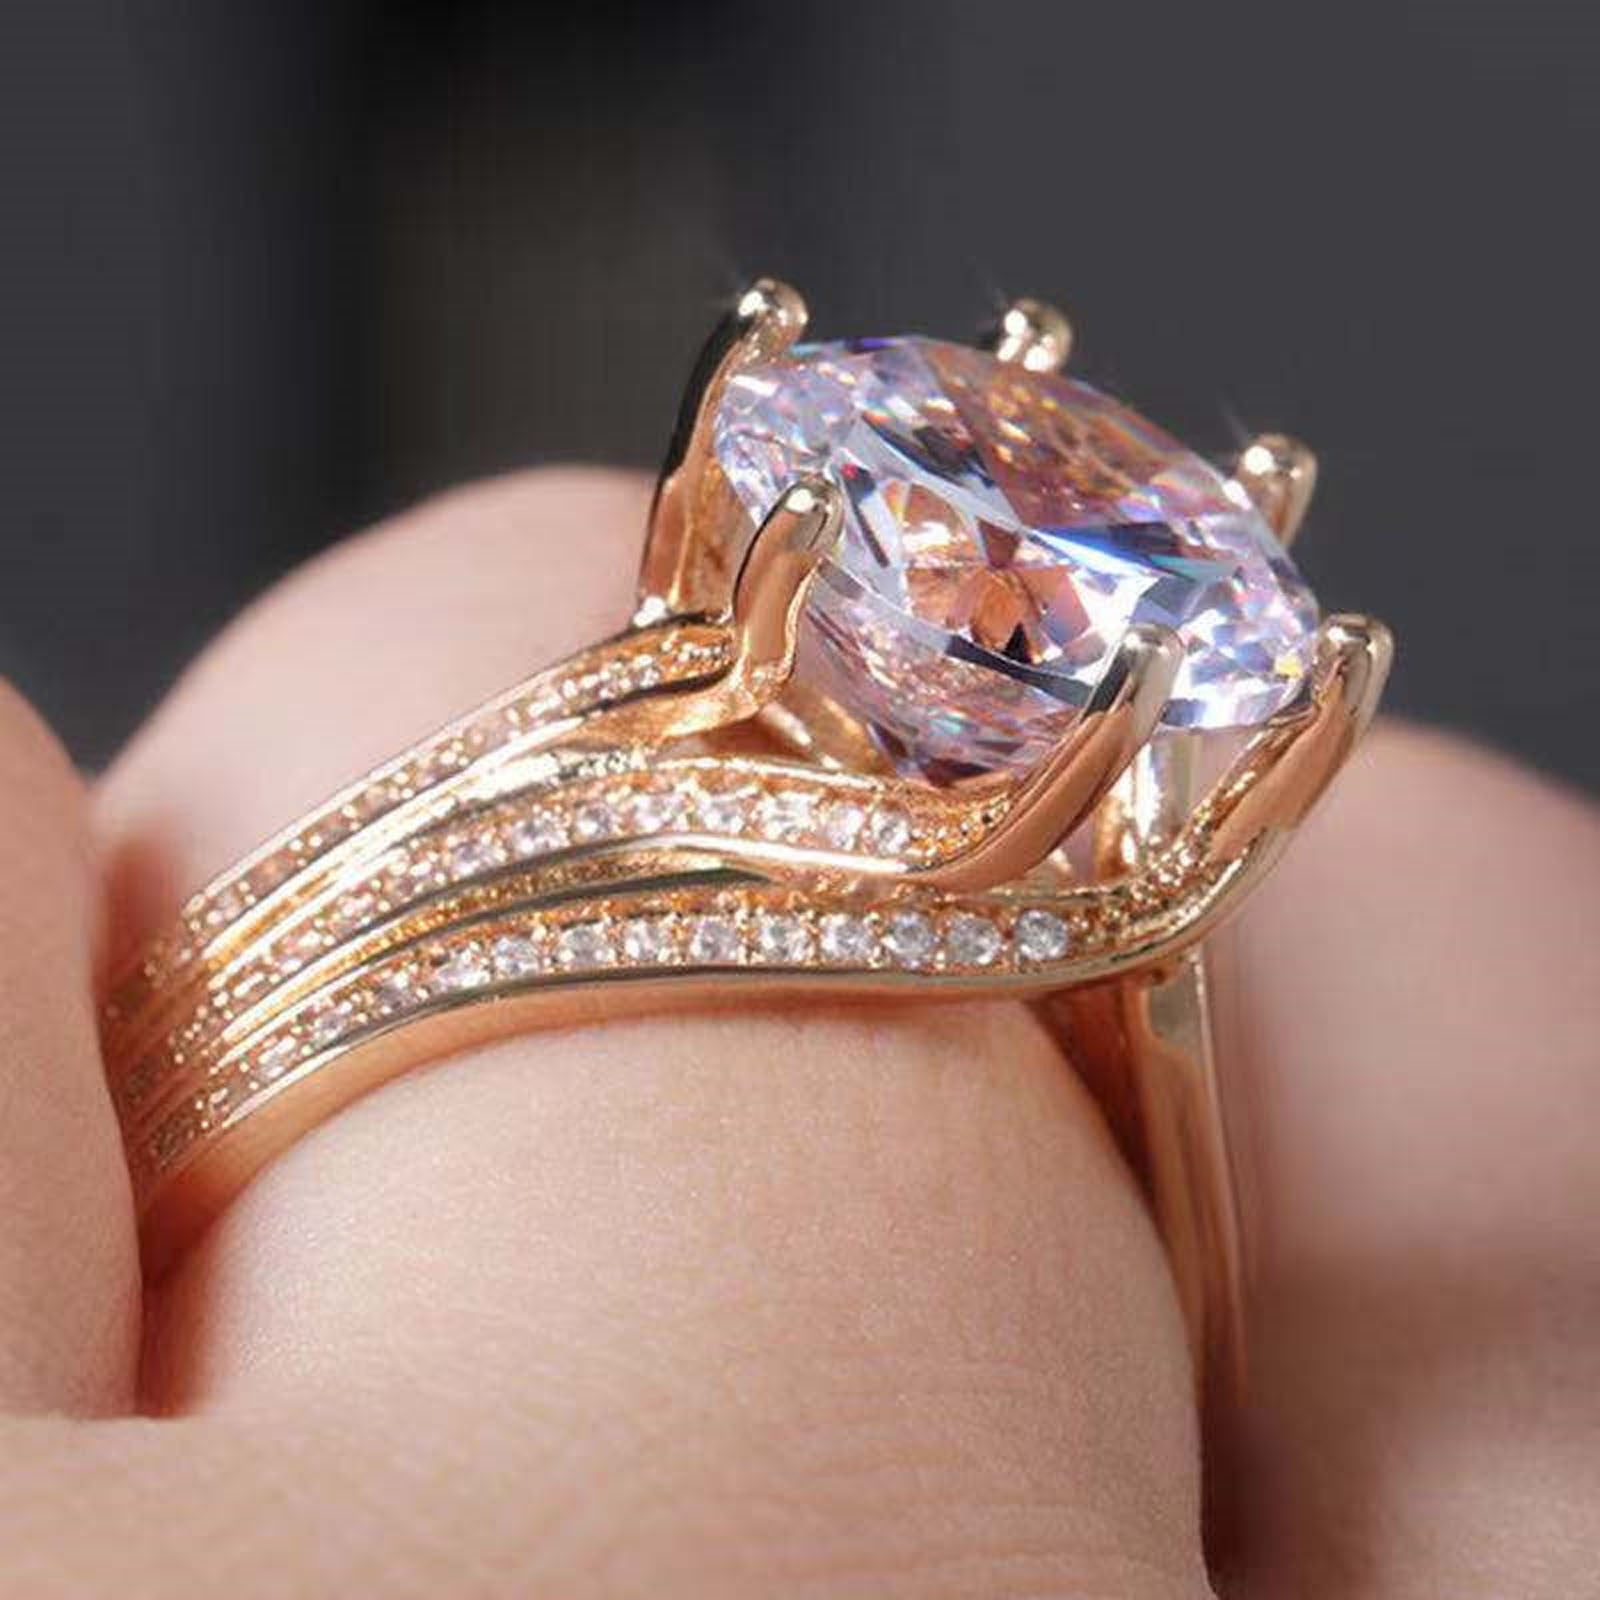 Peora Rose Gold Ring With Greeting Card For Girlfriend Gift For Valentine:  Buy Peora Rose Gold Ring With Greeting Card For Girlfriend Gift For  Valentine Online at Best Price in India |